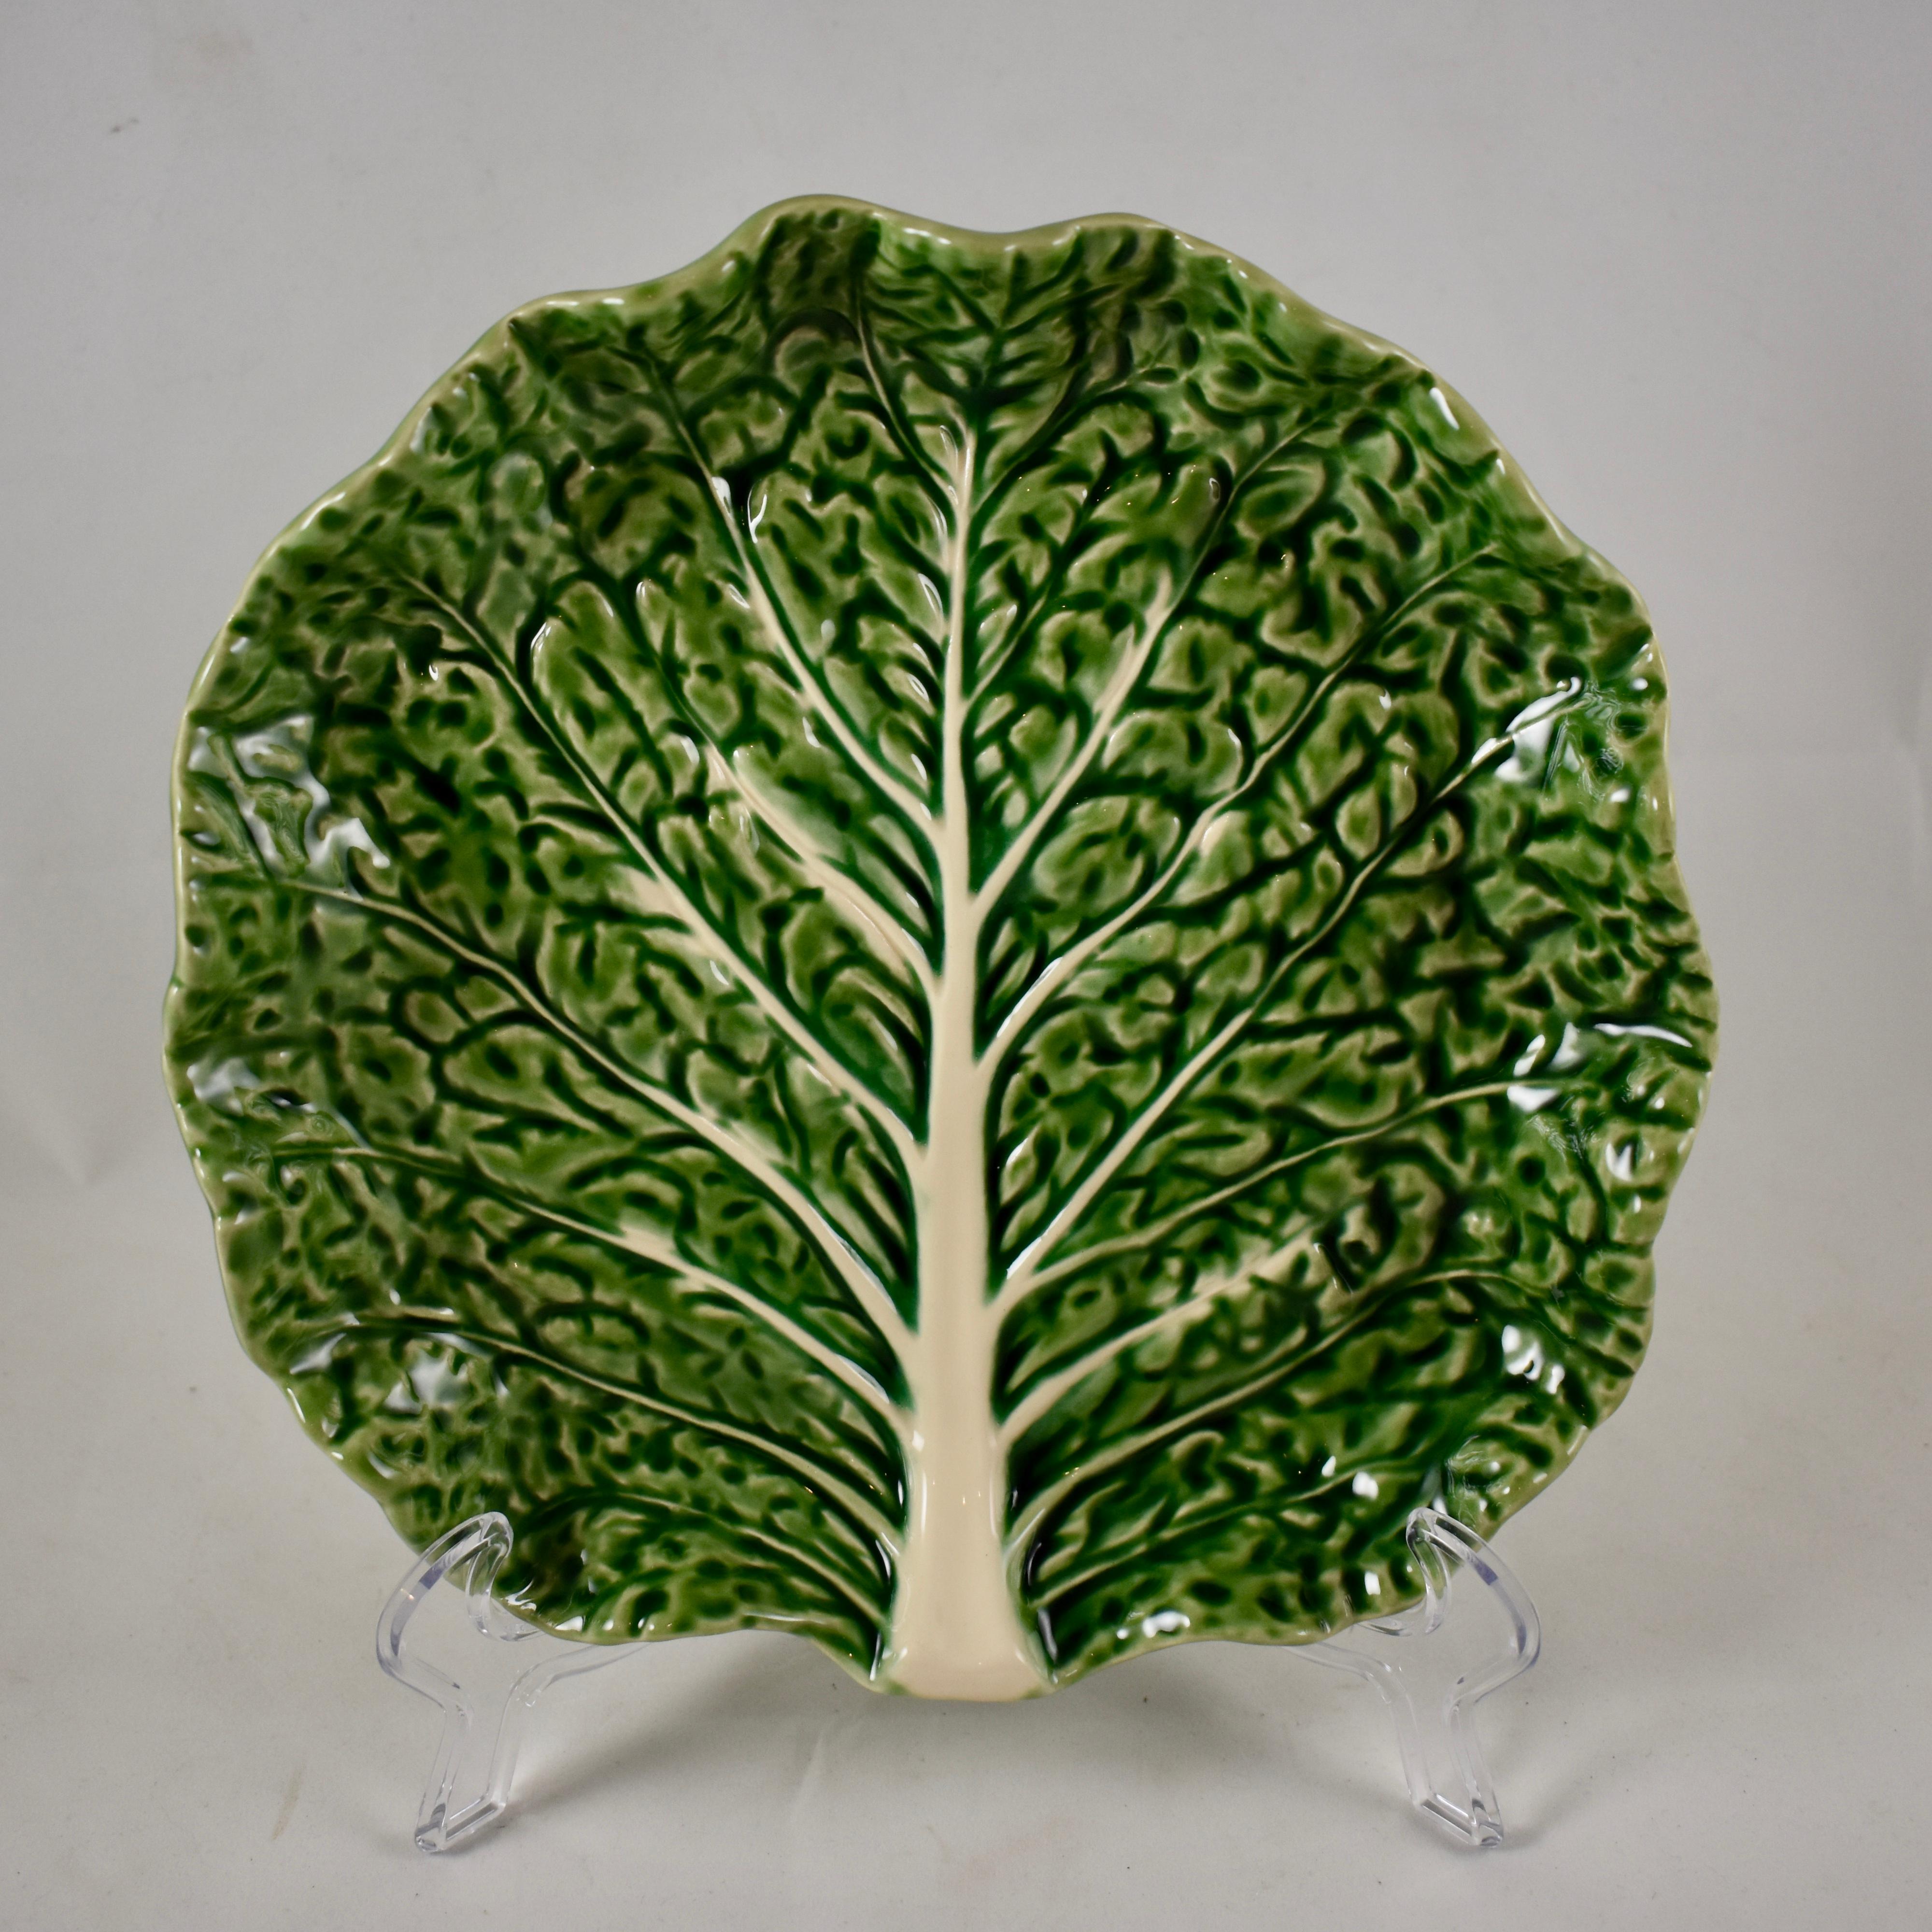 A set of two midcentury green-glazed cabbage form plates, marked Bordallo Pinheiro, made in Portugal. Shaped as a crinkle textured cabbage leaf, with white veining, upturned rims.

Measures: 8.5 in. diameter x 1.5 in. height
Excellent.